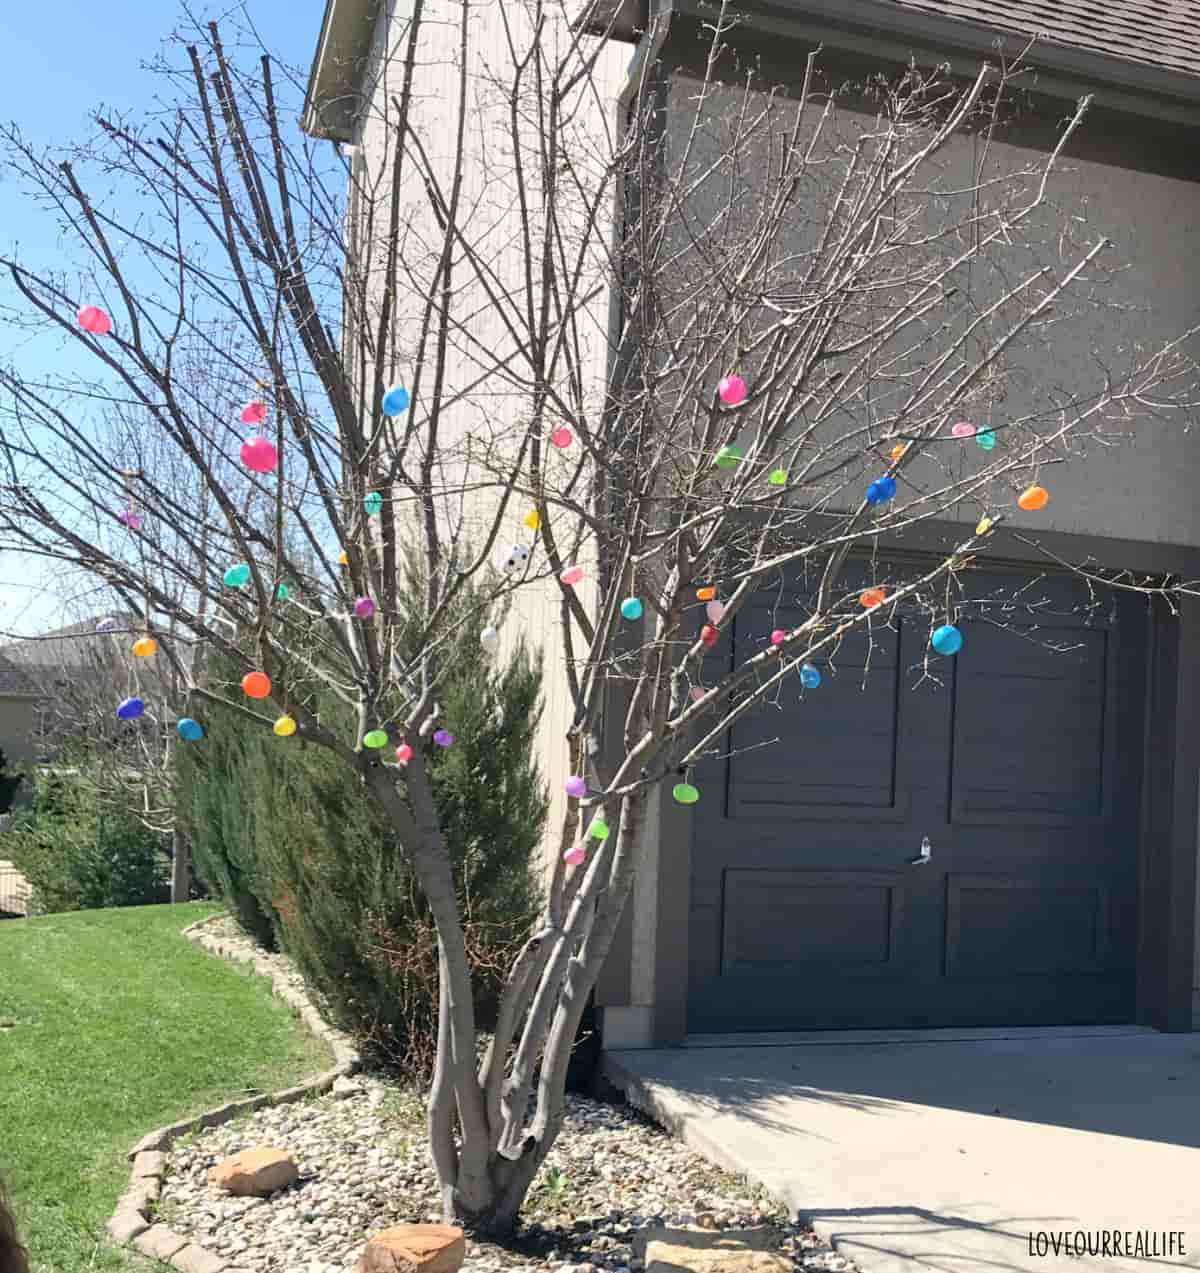 Many plastic Easter eggs spread out on a small ornamental outdoor tree.